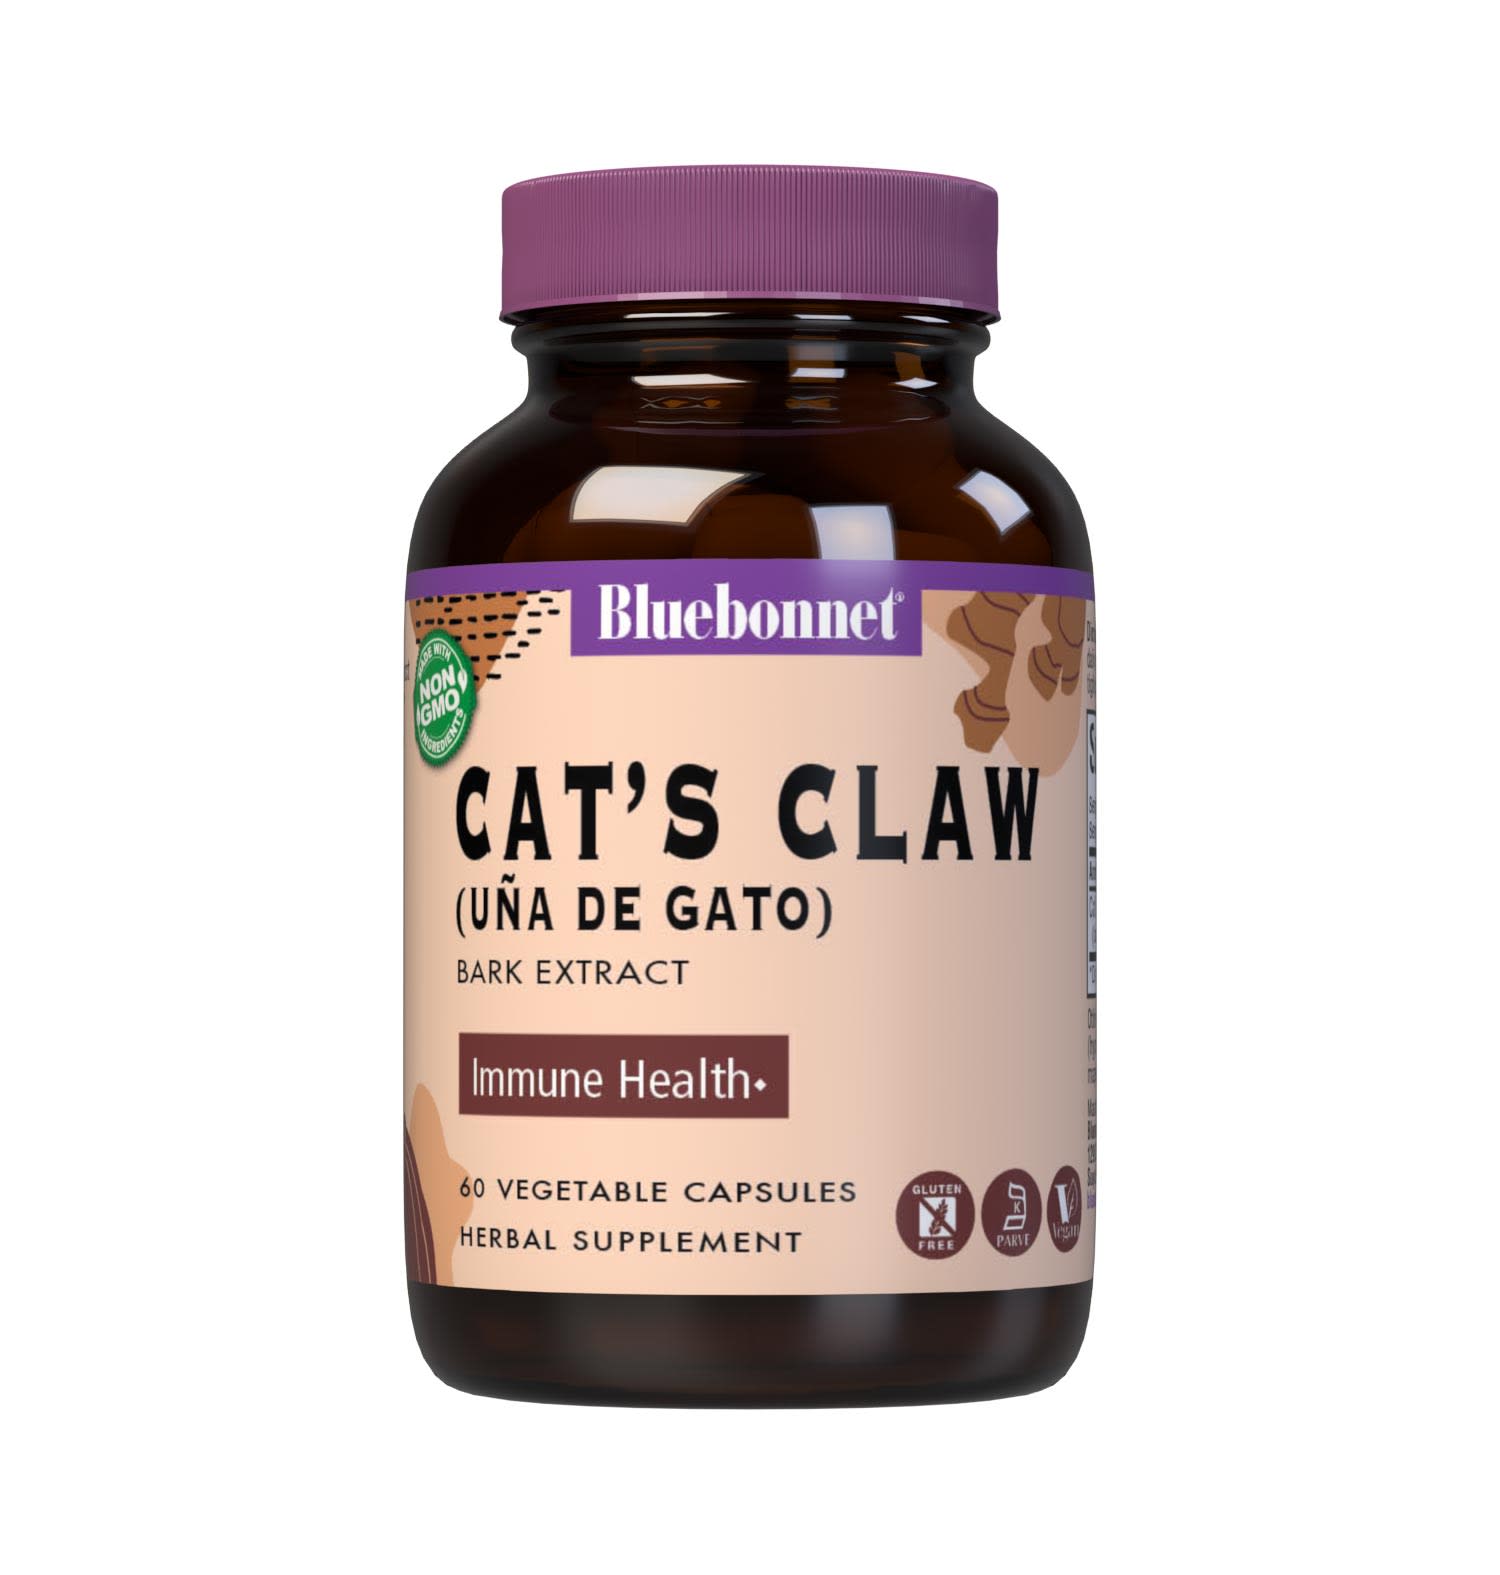 Bluebonnet’s Cat’s Claw Bark Extract 60 Vegetable Capsules contain a full spectrum extract of cat’s claw bark that is carefully produced by a clean and gentle water-based extraction method is employed to capture and preserve cat’s claw’s most valuable components. #size_60 count